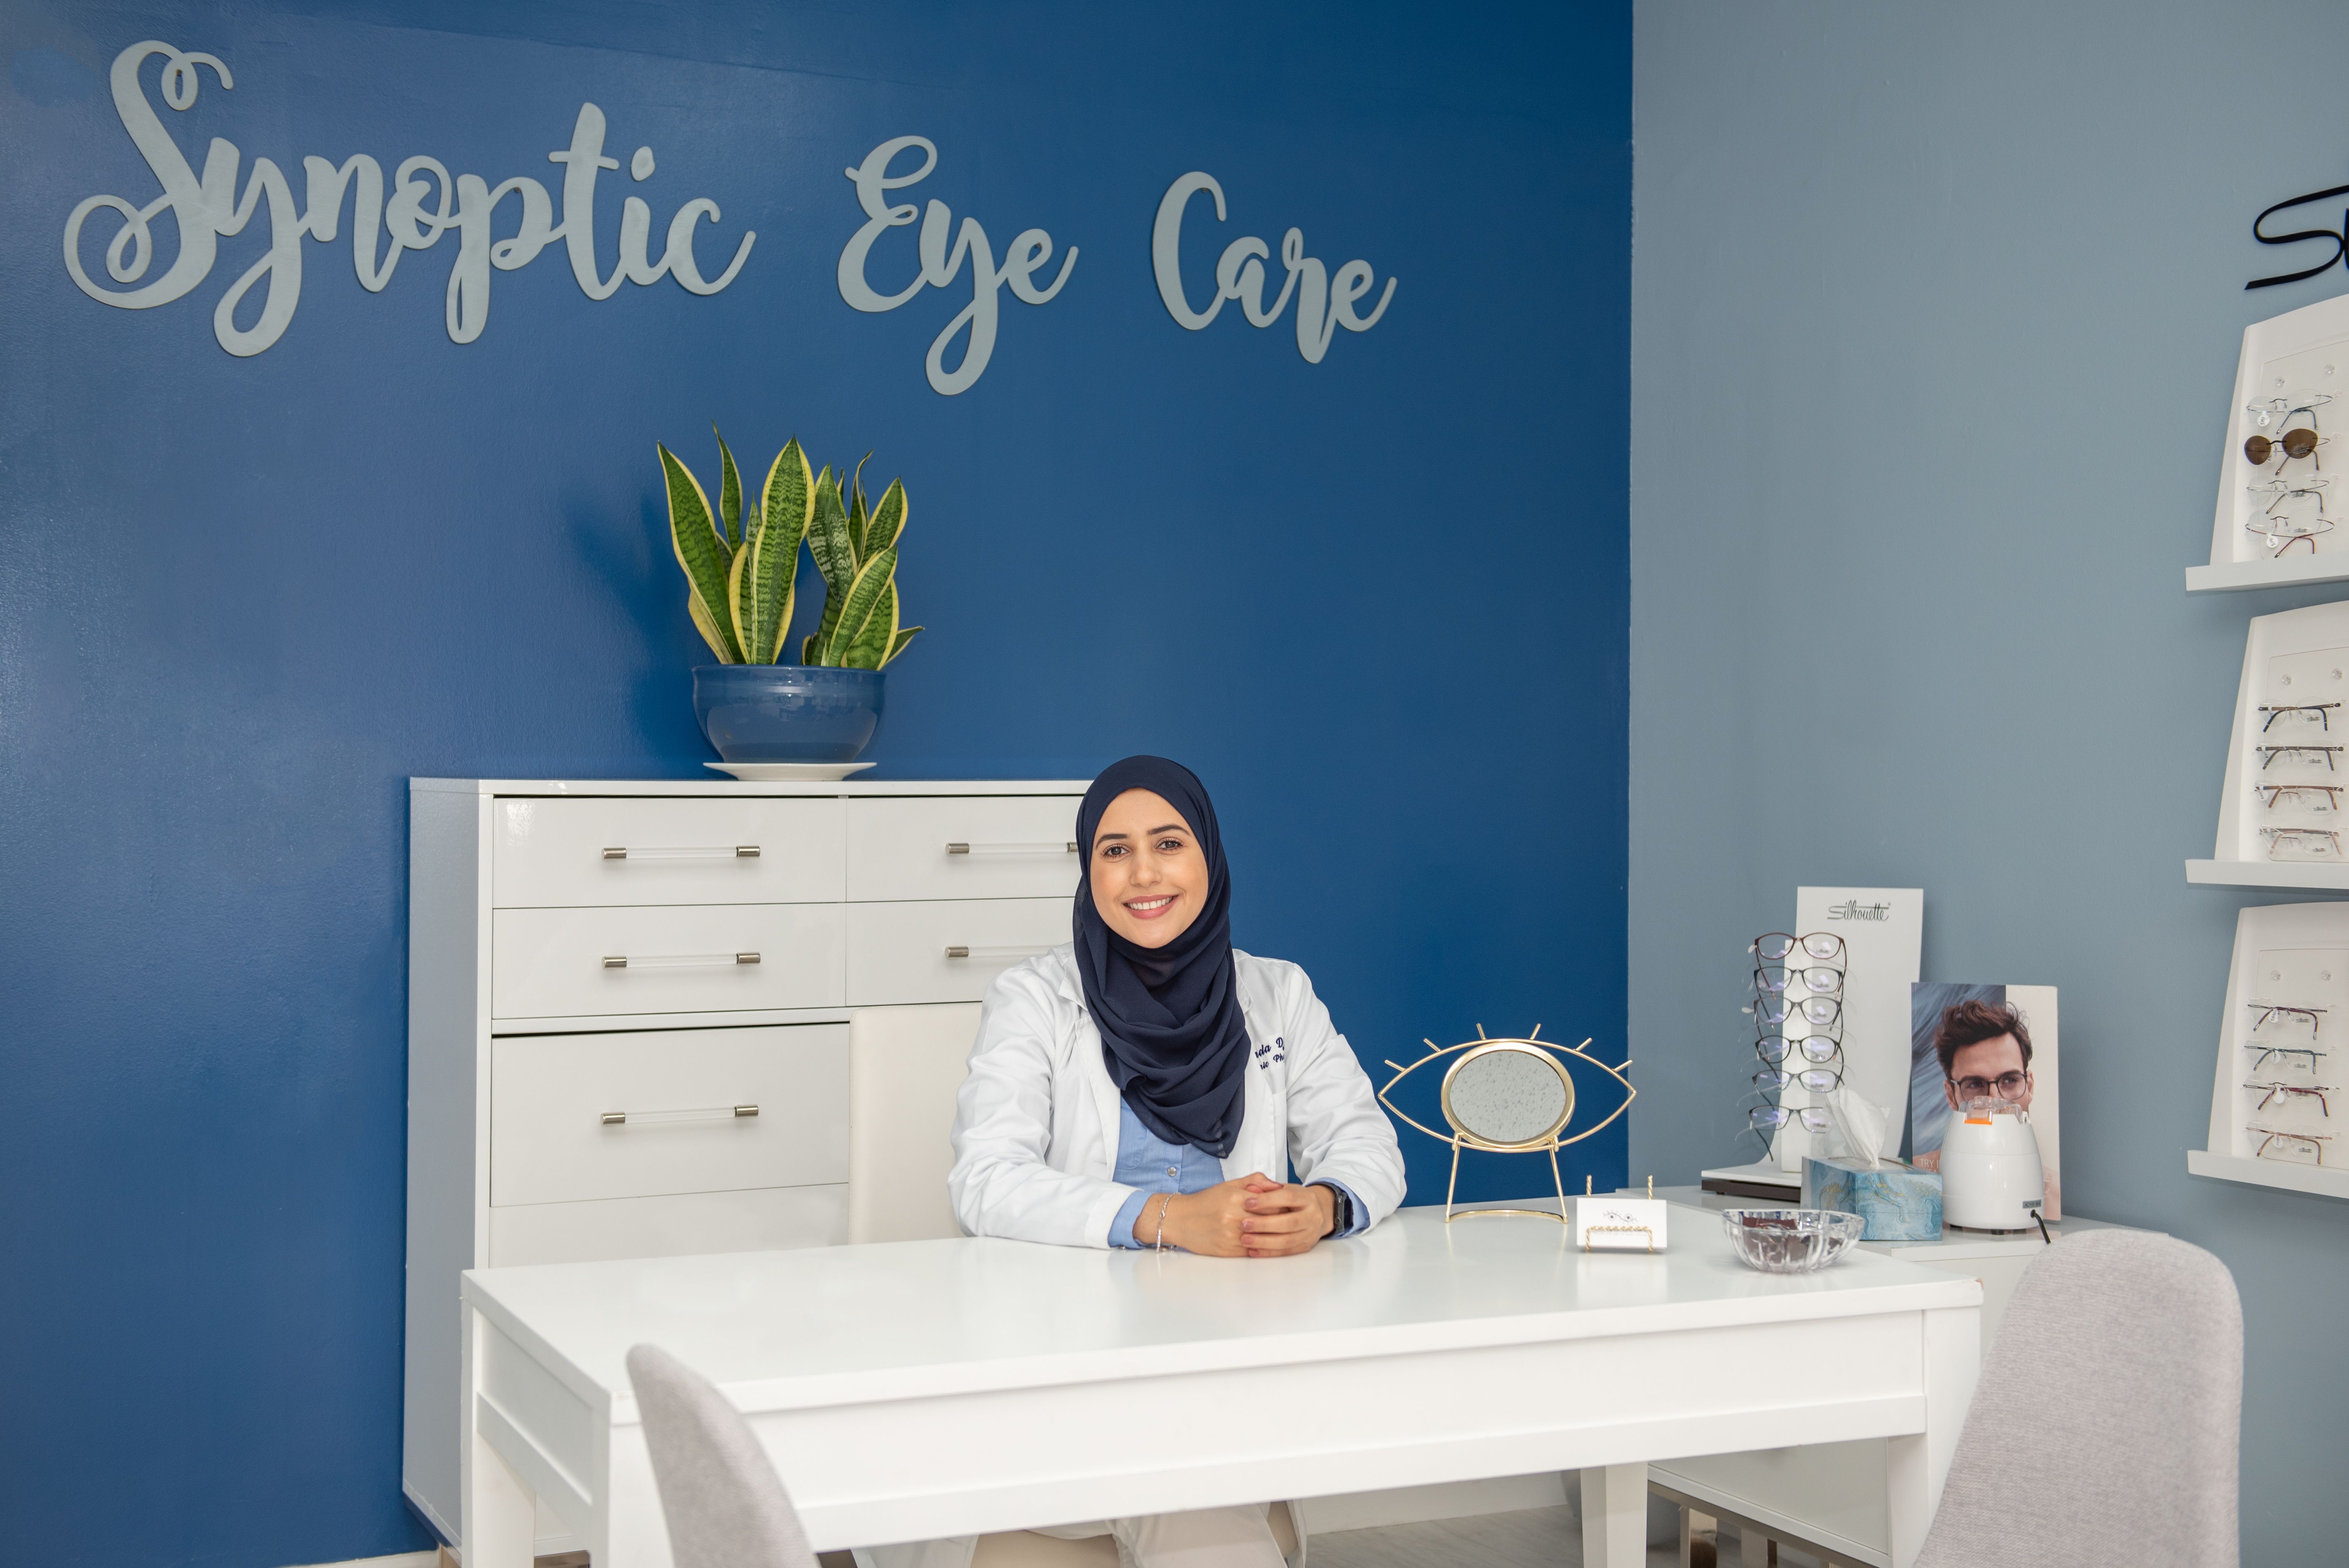 Eye doctor with patient